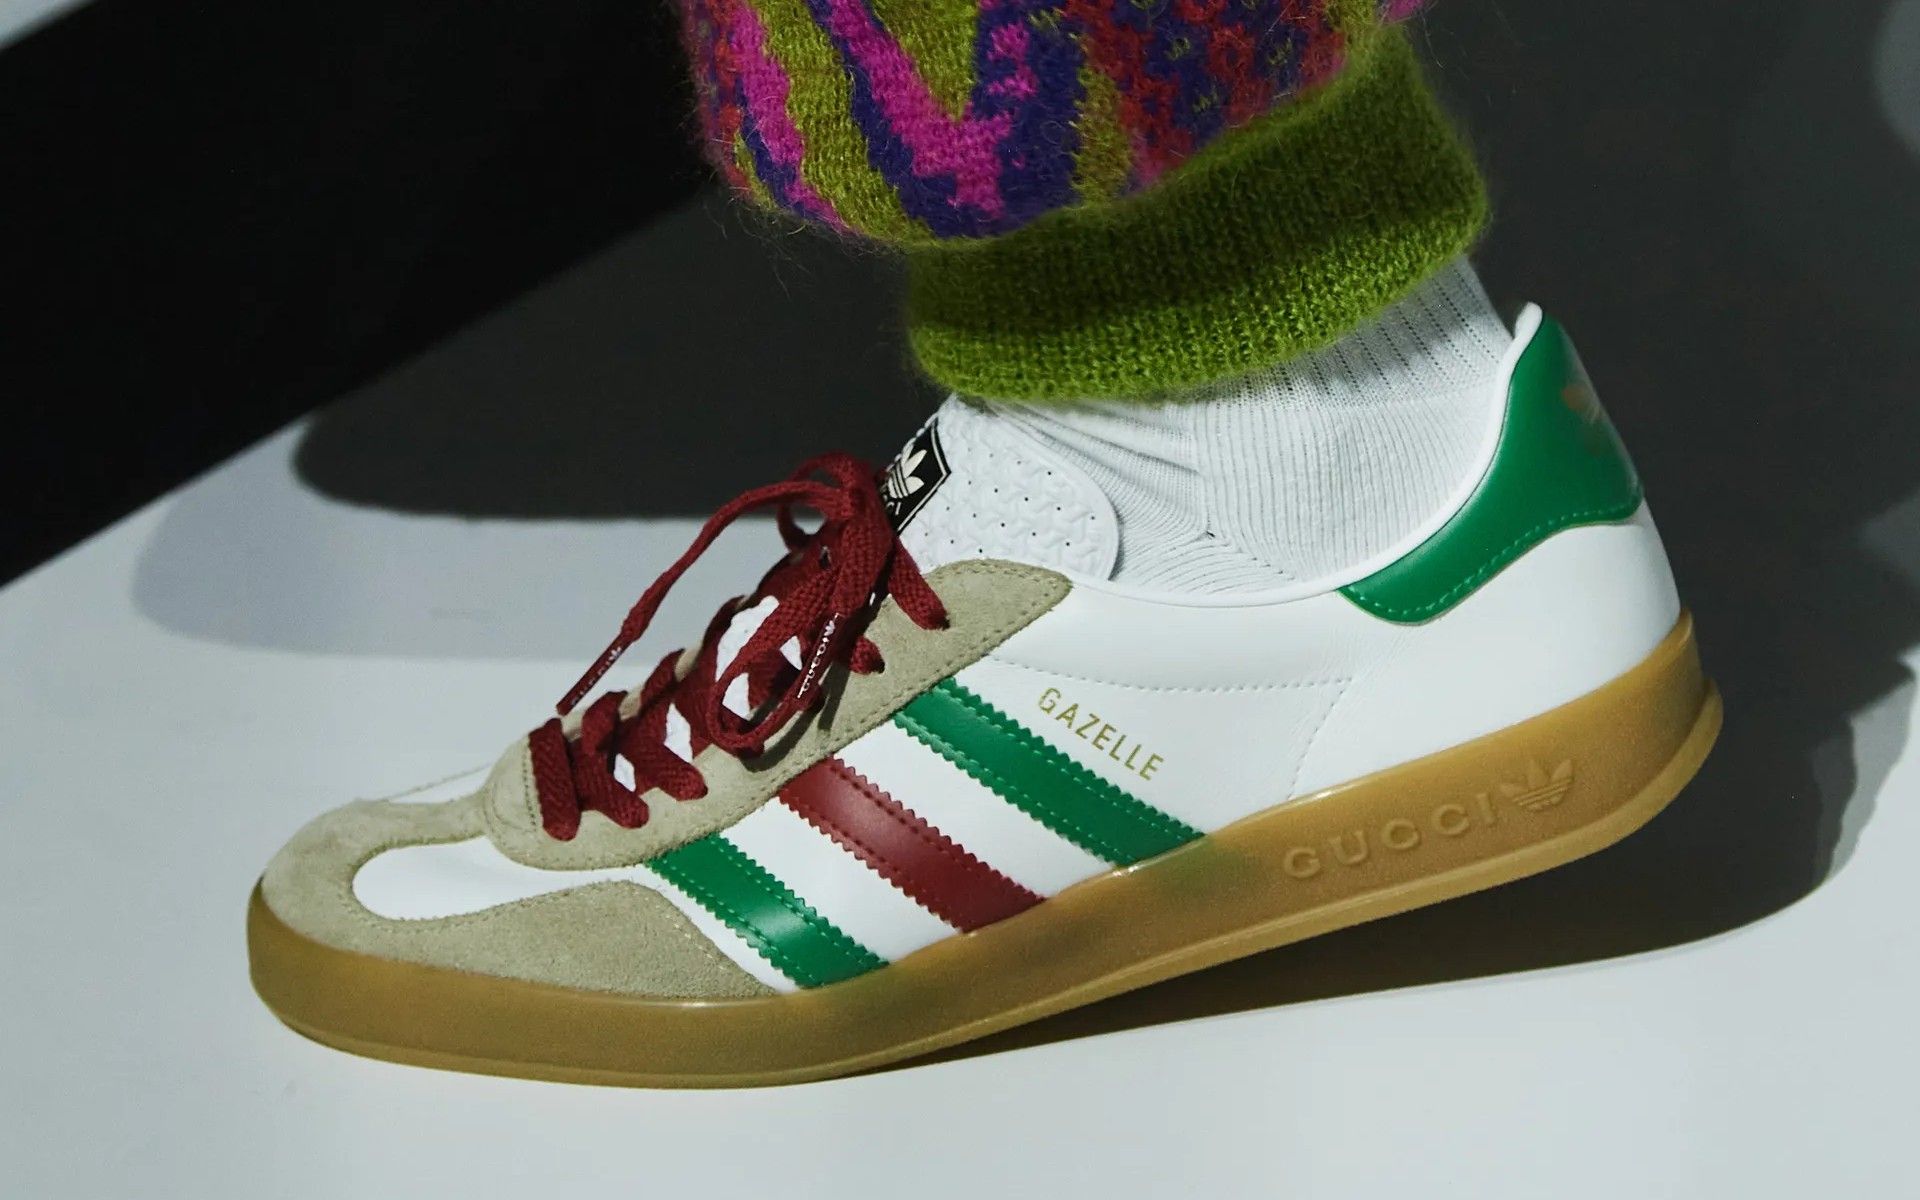 adidas x Gucci: the hype